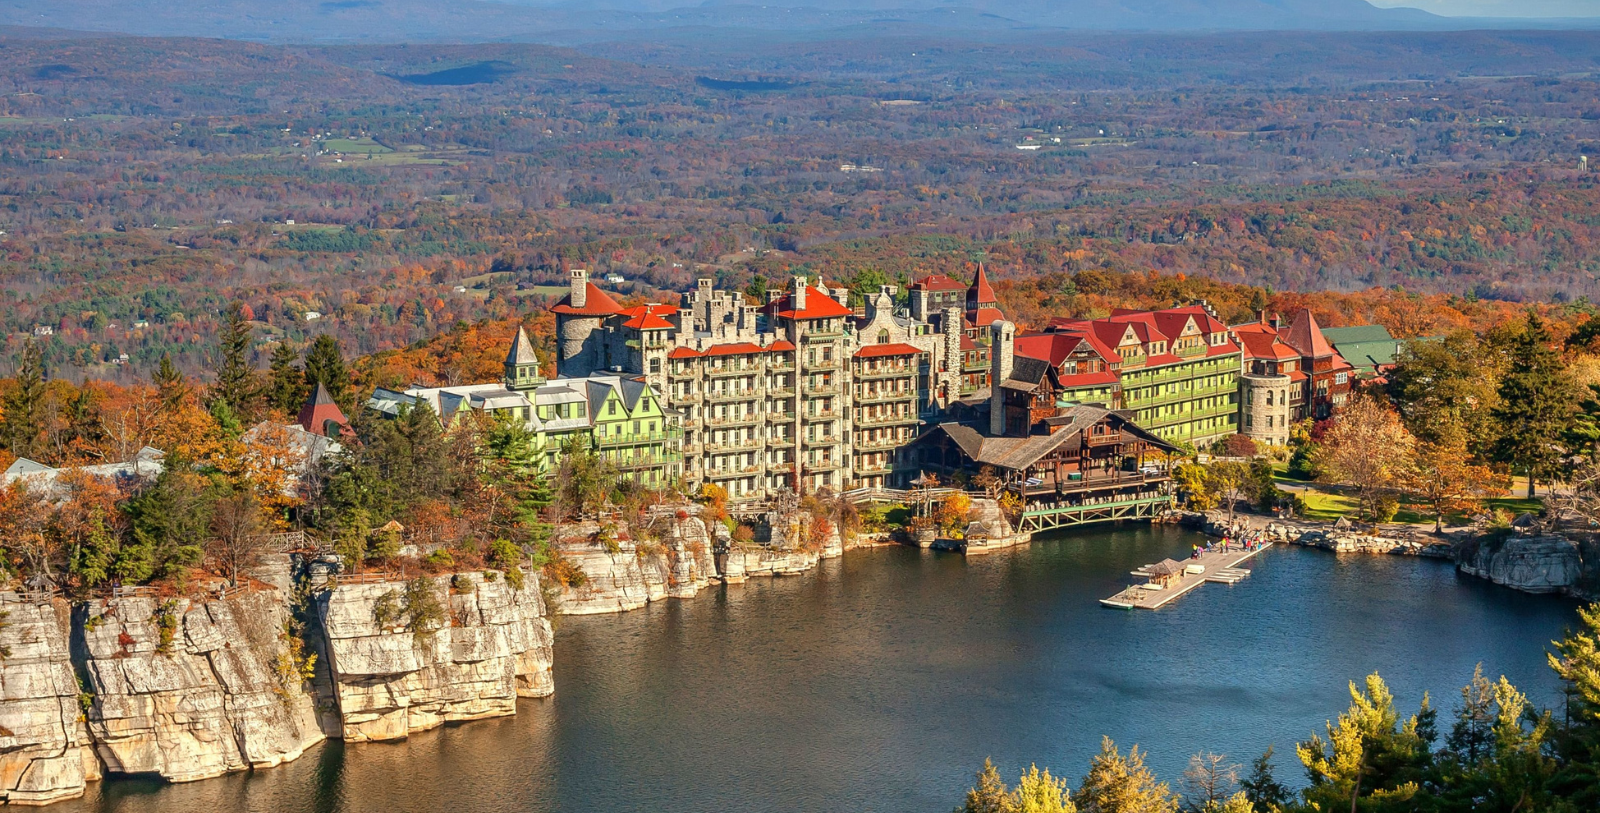 Image of the Mohonk Mountain House